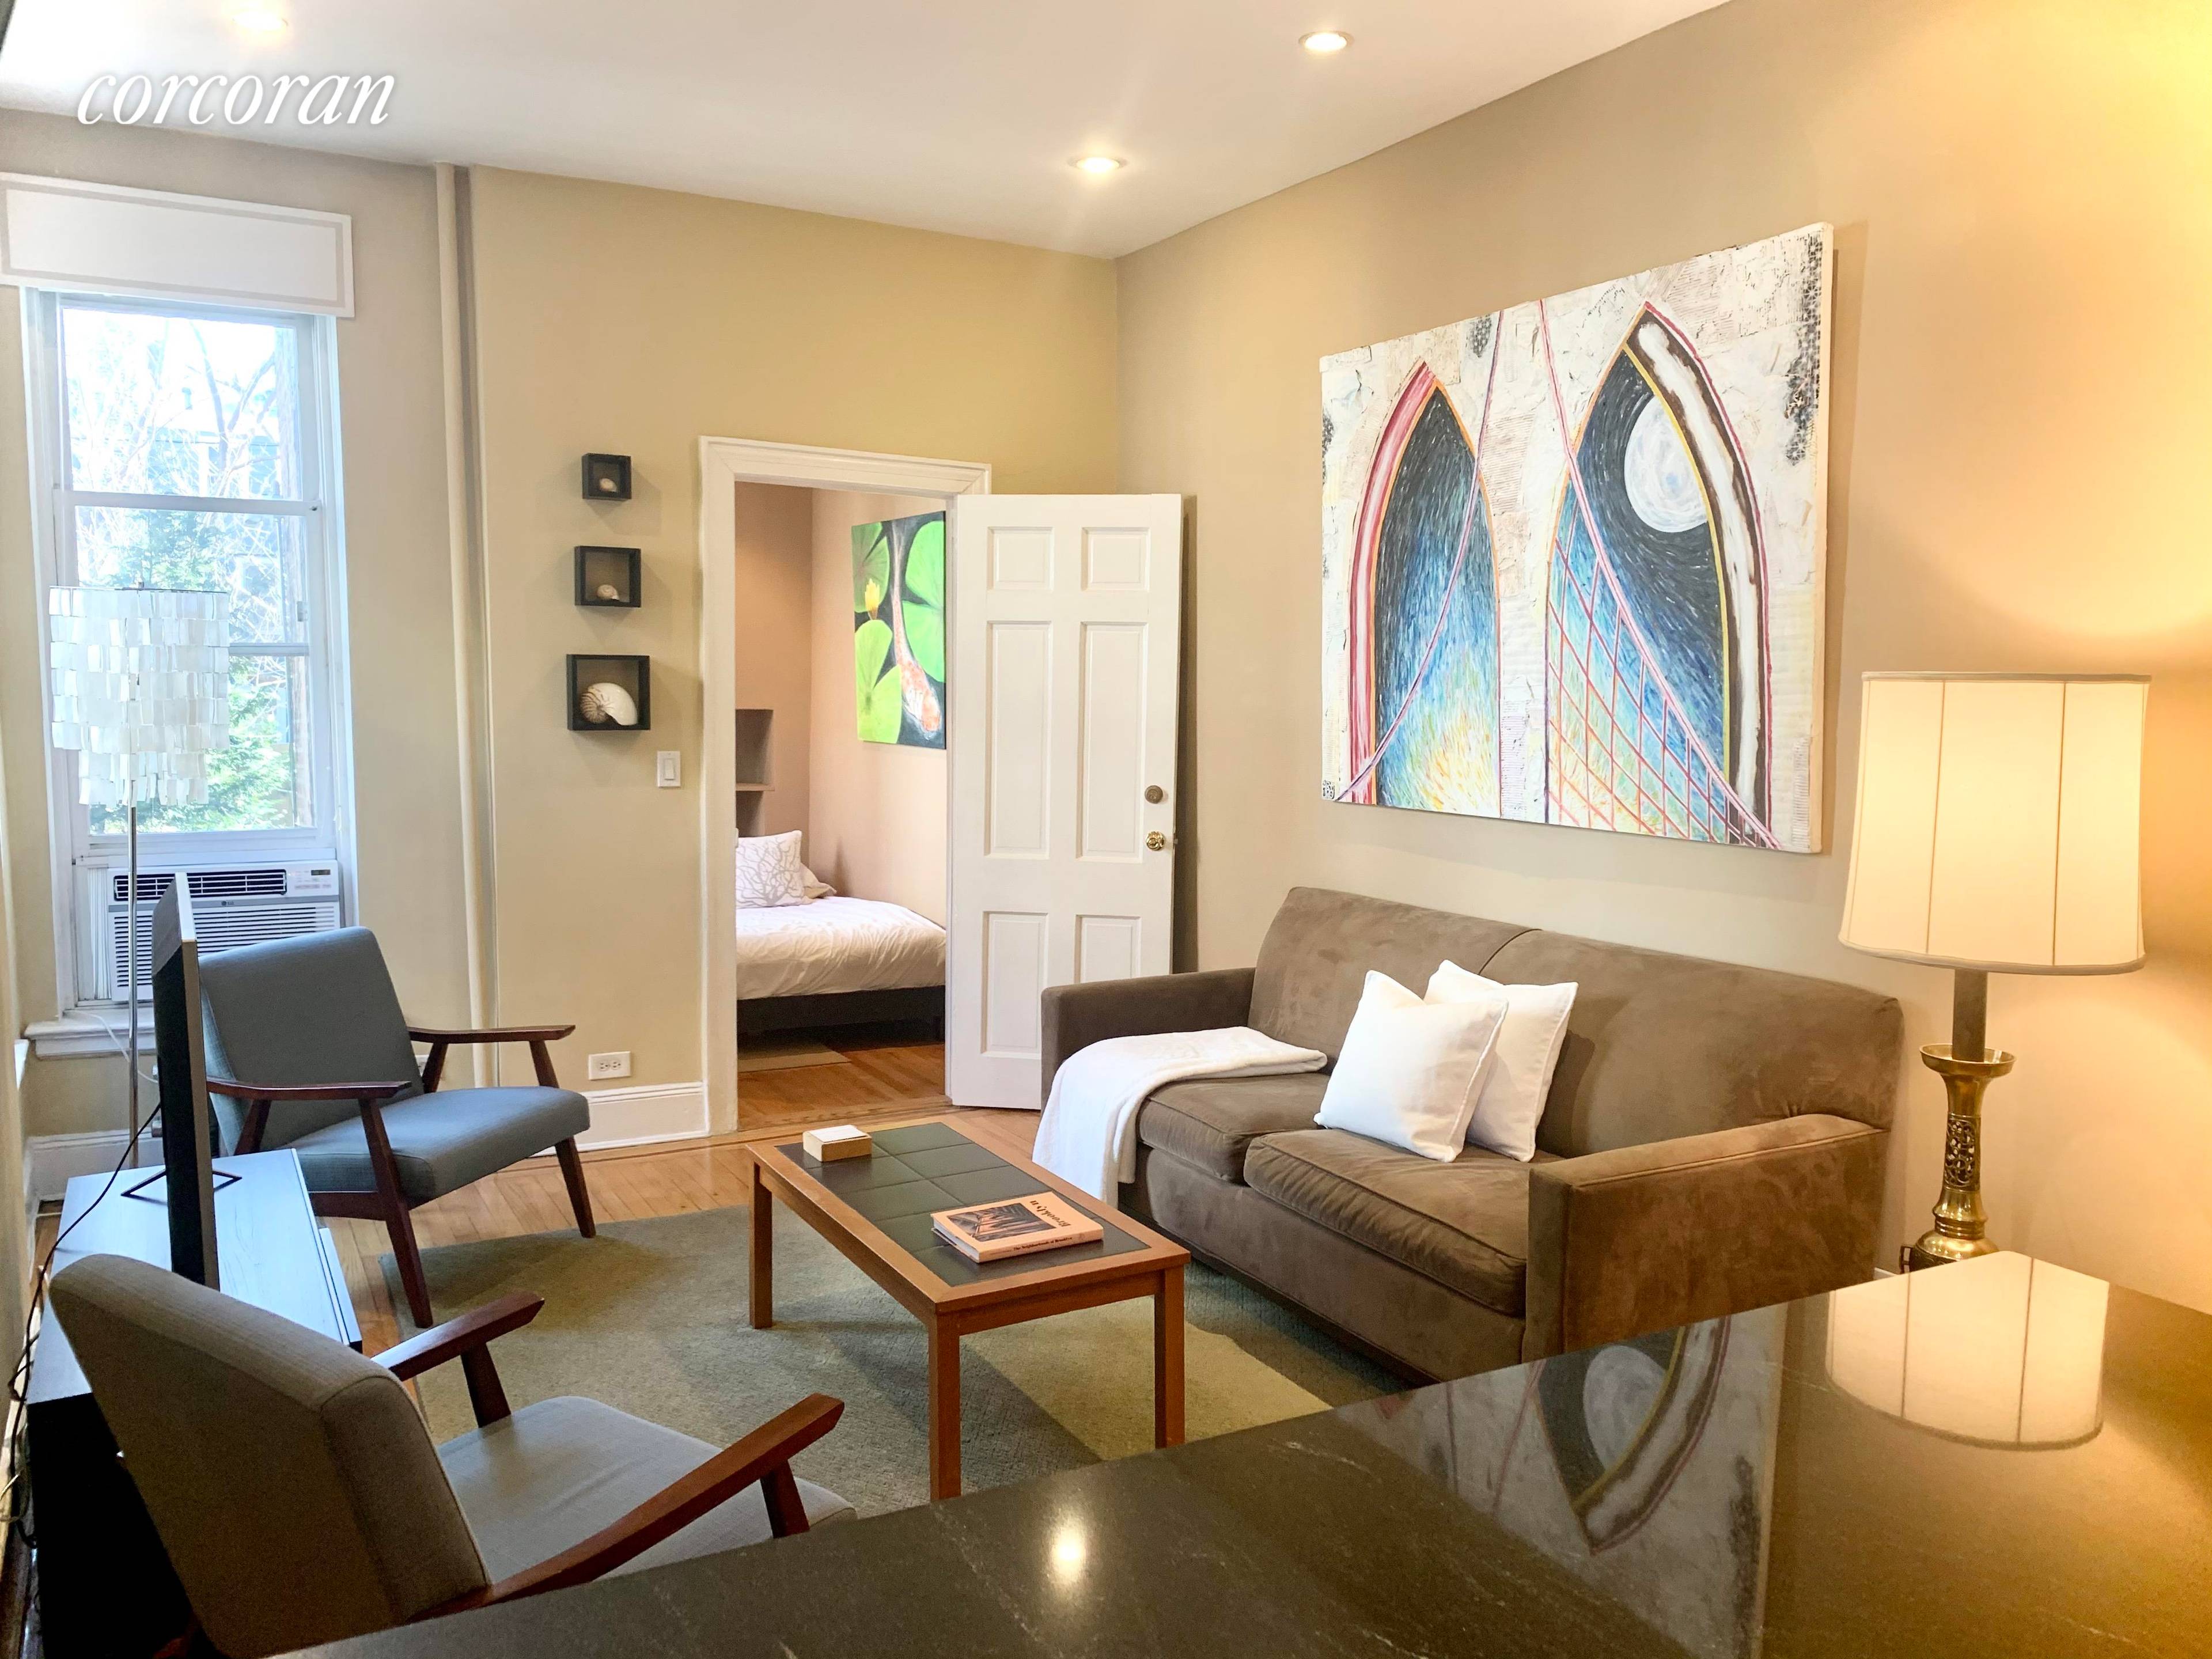 This modern and elegant 2 Bedroom luxury FURNISHED apartment is in the heart of Brooklyn Heights' historic neighborhood.